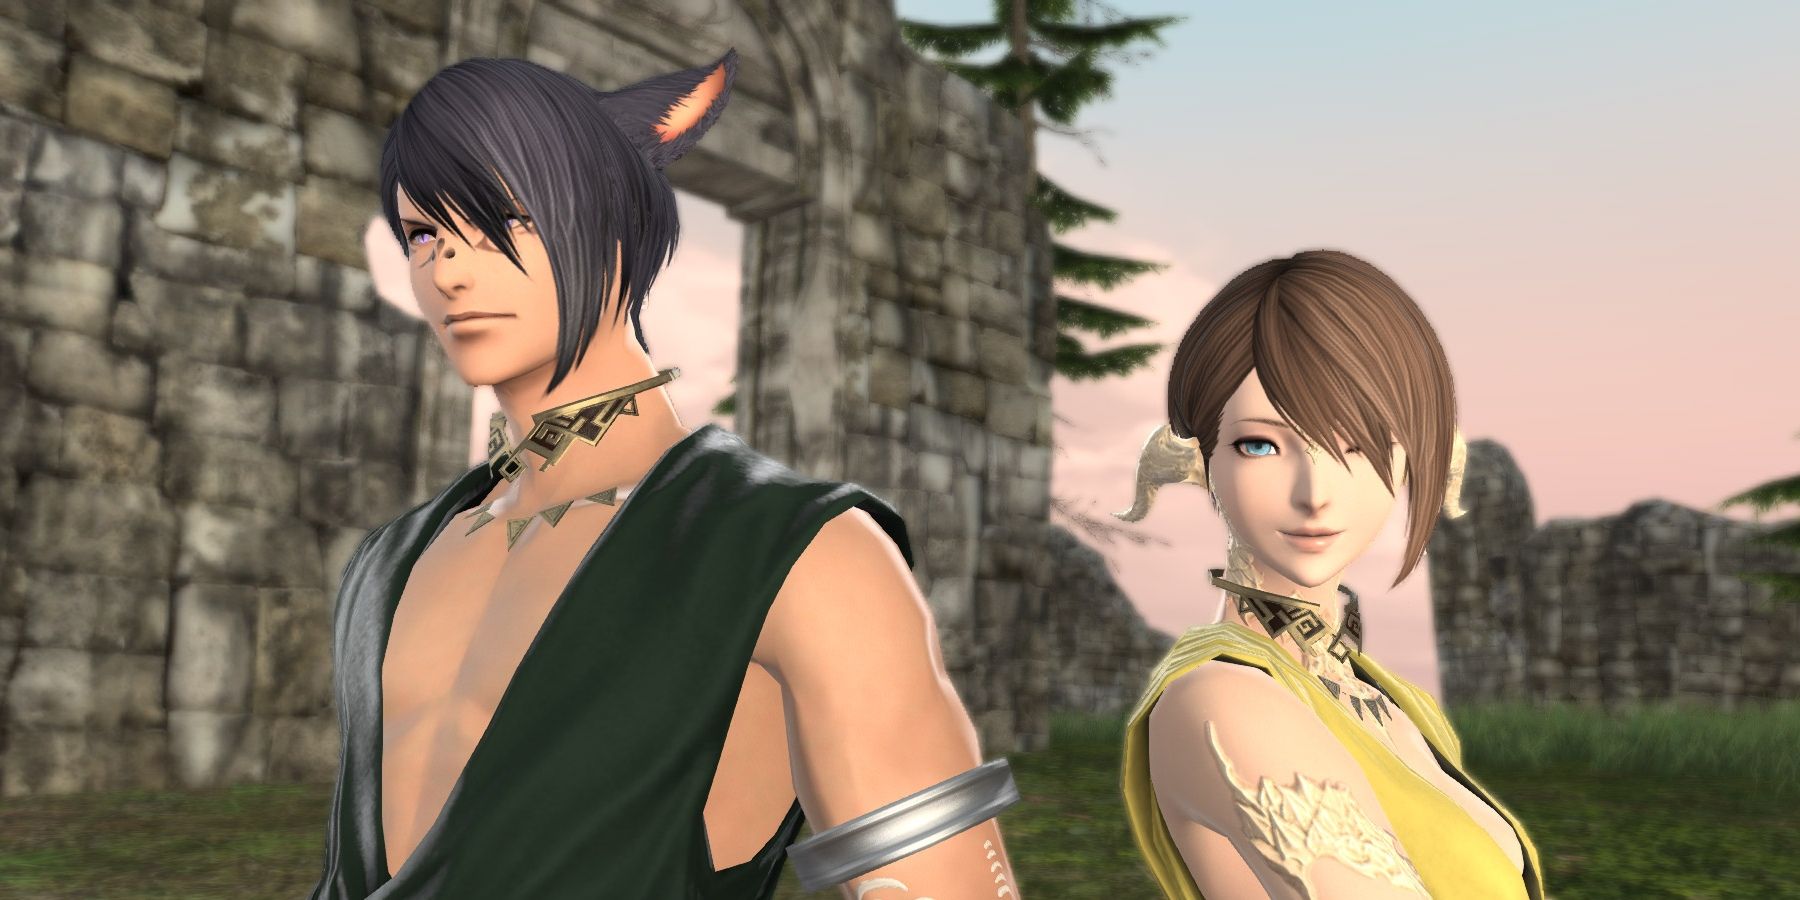 Alice - The Glamour Dresser : Final Fantasy XIV Mods and More